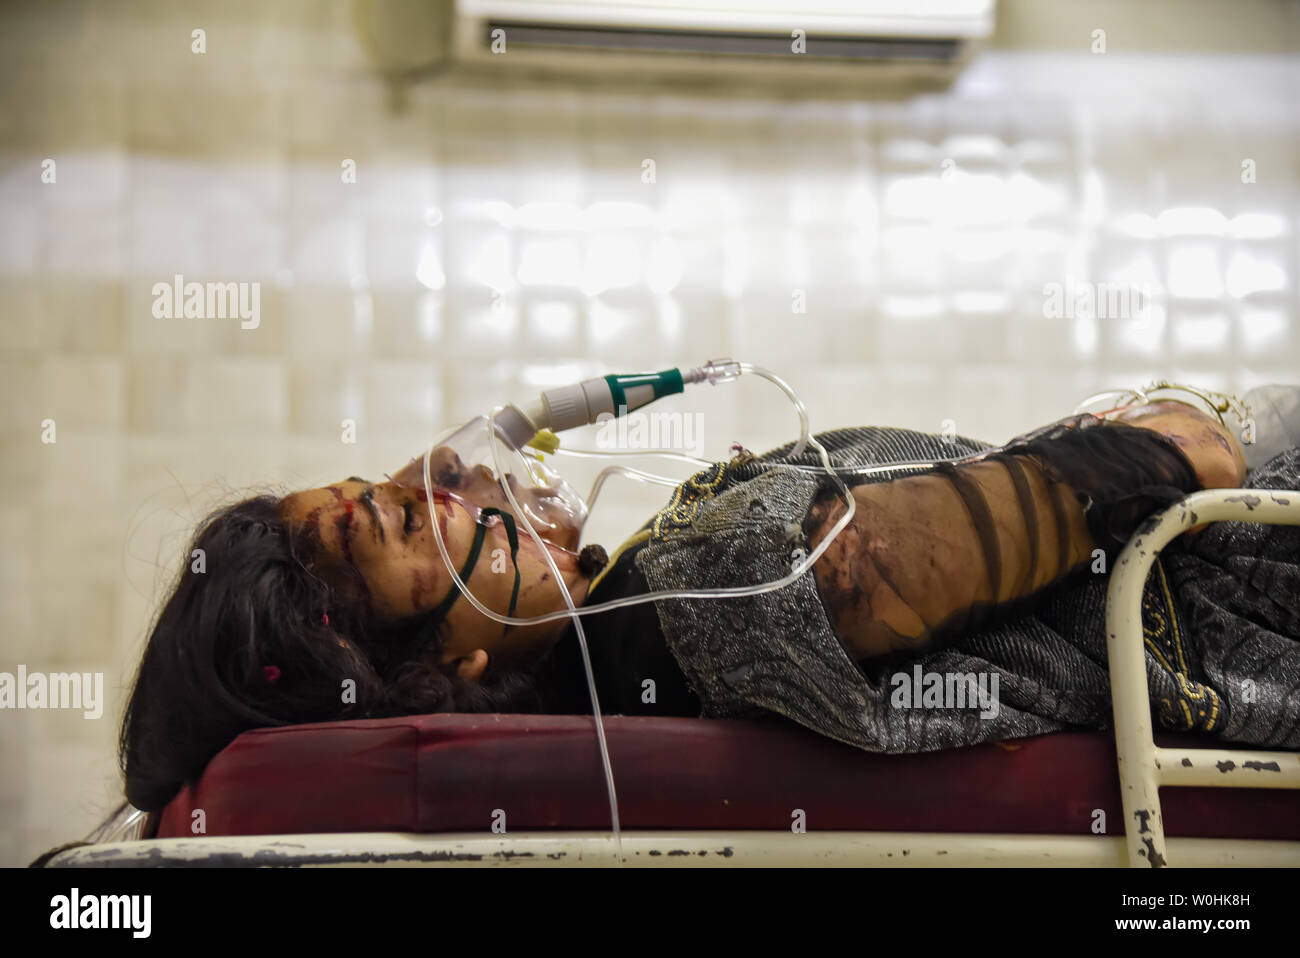 (EDITORS NOTE: Image contains graphic content.) An injured woman seen getting treatment inside a hospital in Srinagar. Eleven students including nine girls died and several other injured after a mini Bus carrying students to an excursion fell into a gorge on the historic Mughal road in south Kashmir’s Shopian district. Stock Photo